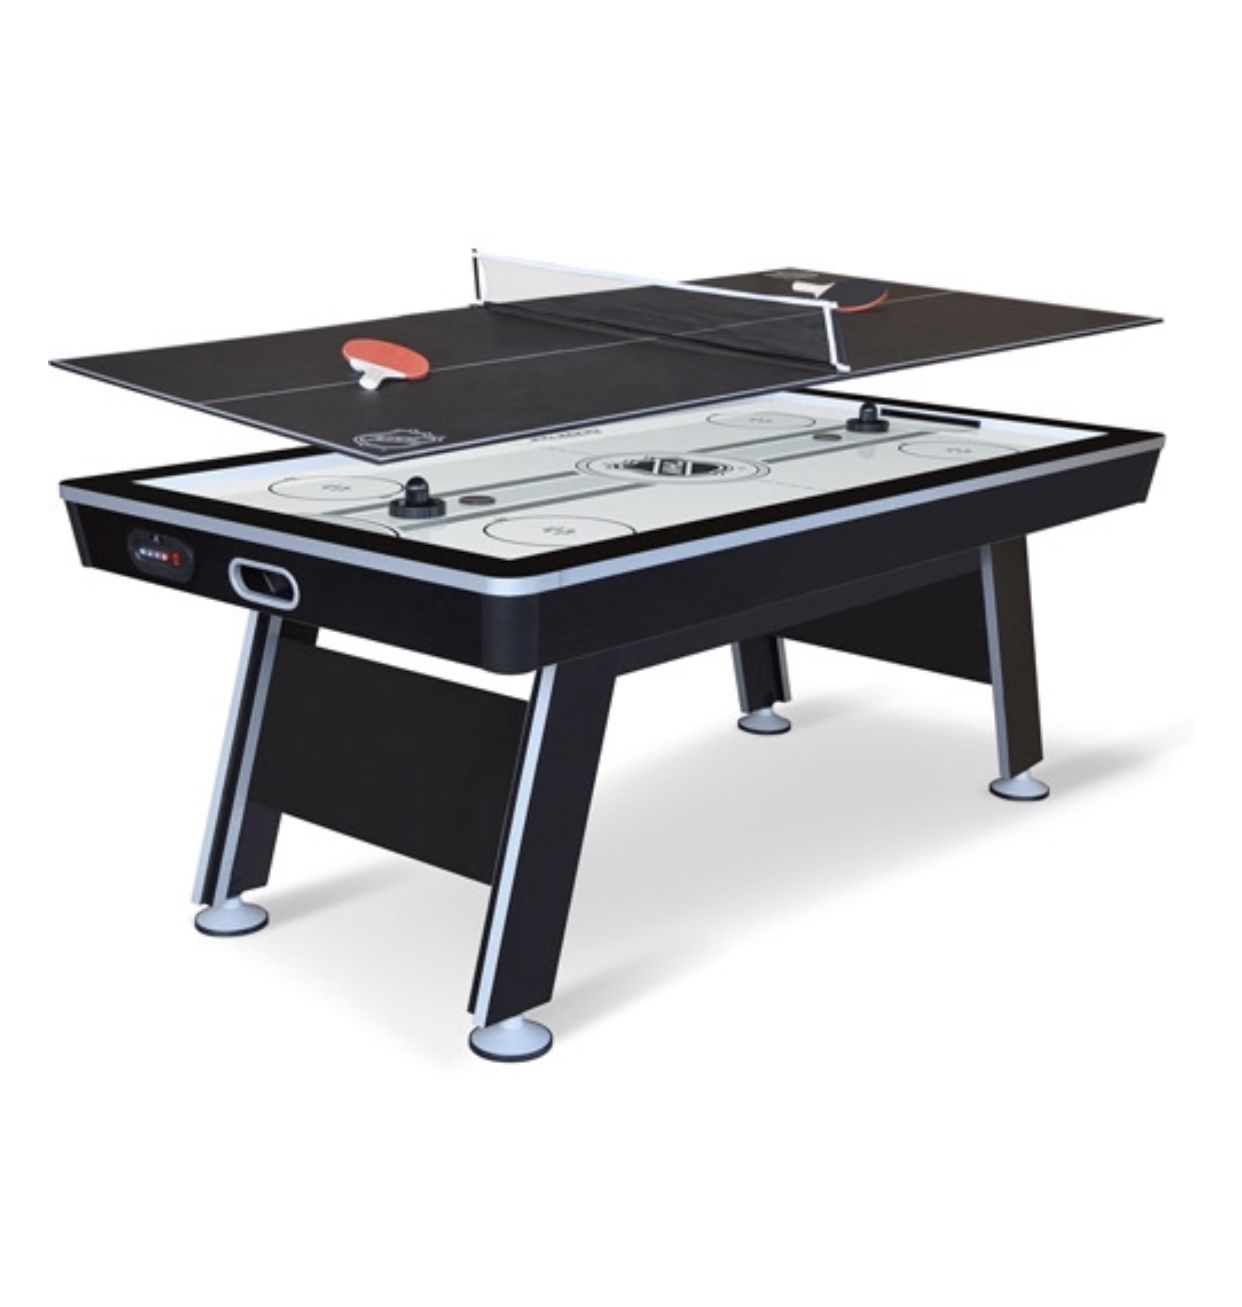 NHL 80 inch Air Powered Hover Hockey Table with Bonus Table Tennis Top New In Box